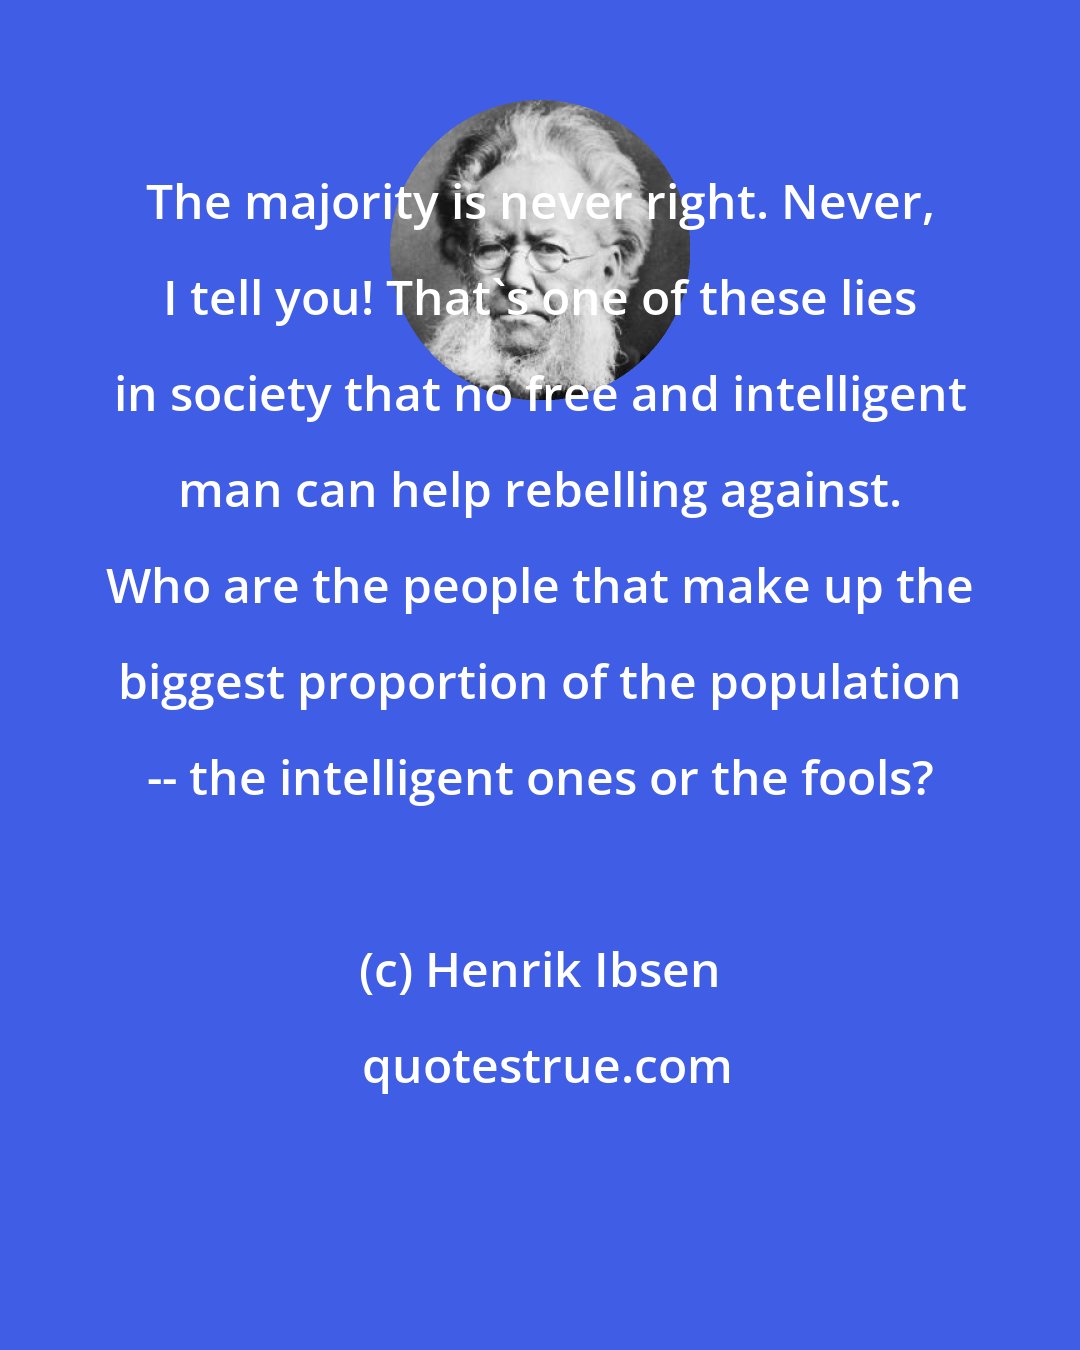 Henrik Ibsen: The majority is never right. Never, I tell you! That's one of these lies in society that no free and intelligent man can help rebelling against. Who are the people that make up the biggest proportion of the population -- the intelligent ones or the fools?